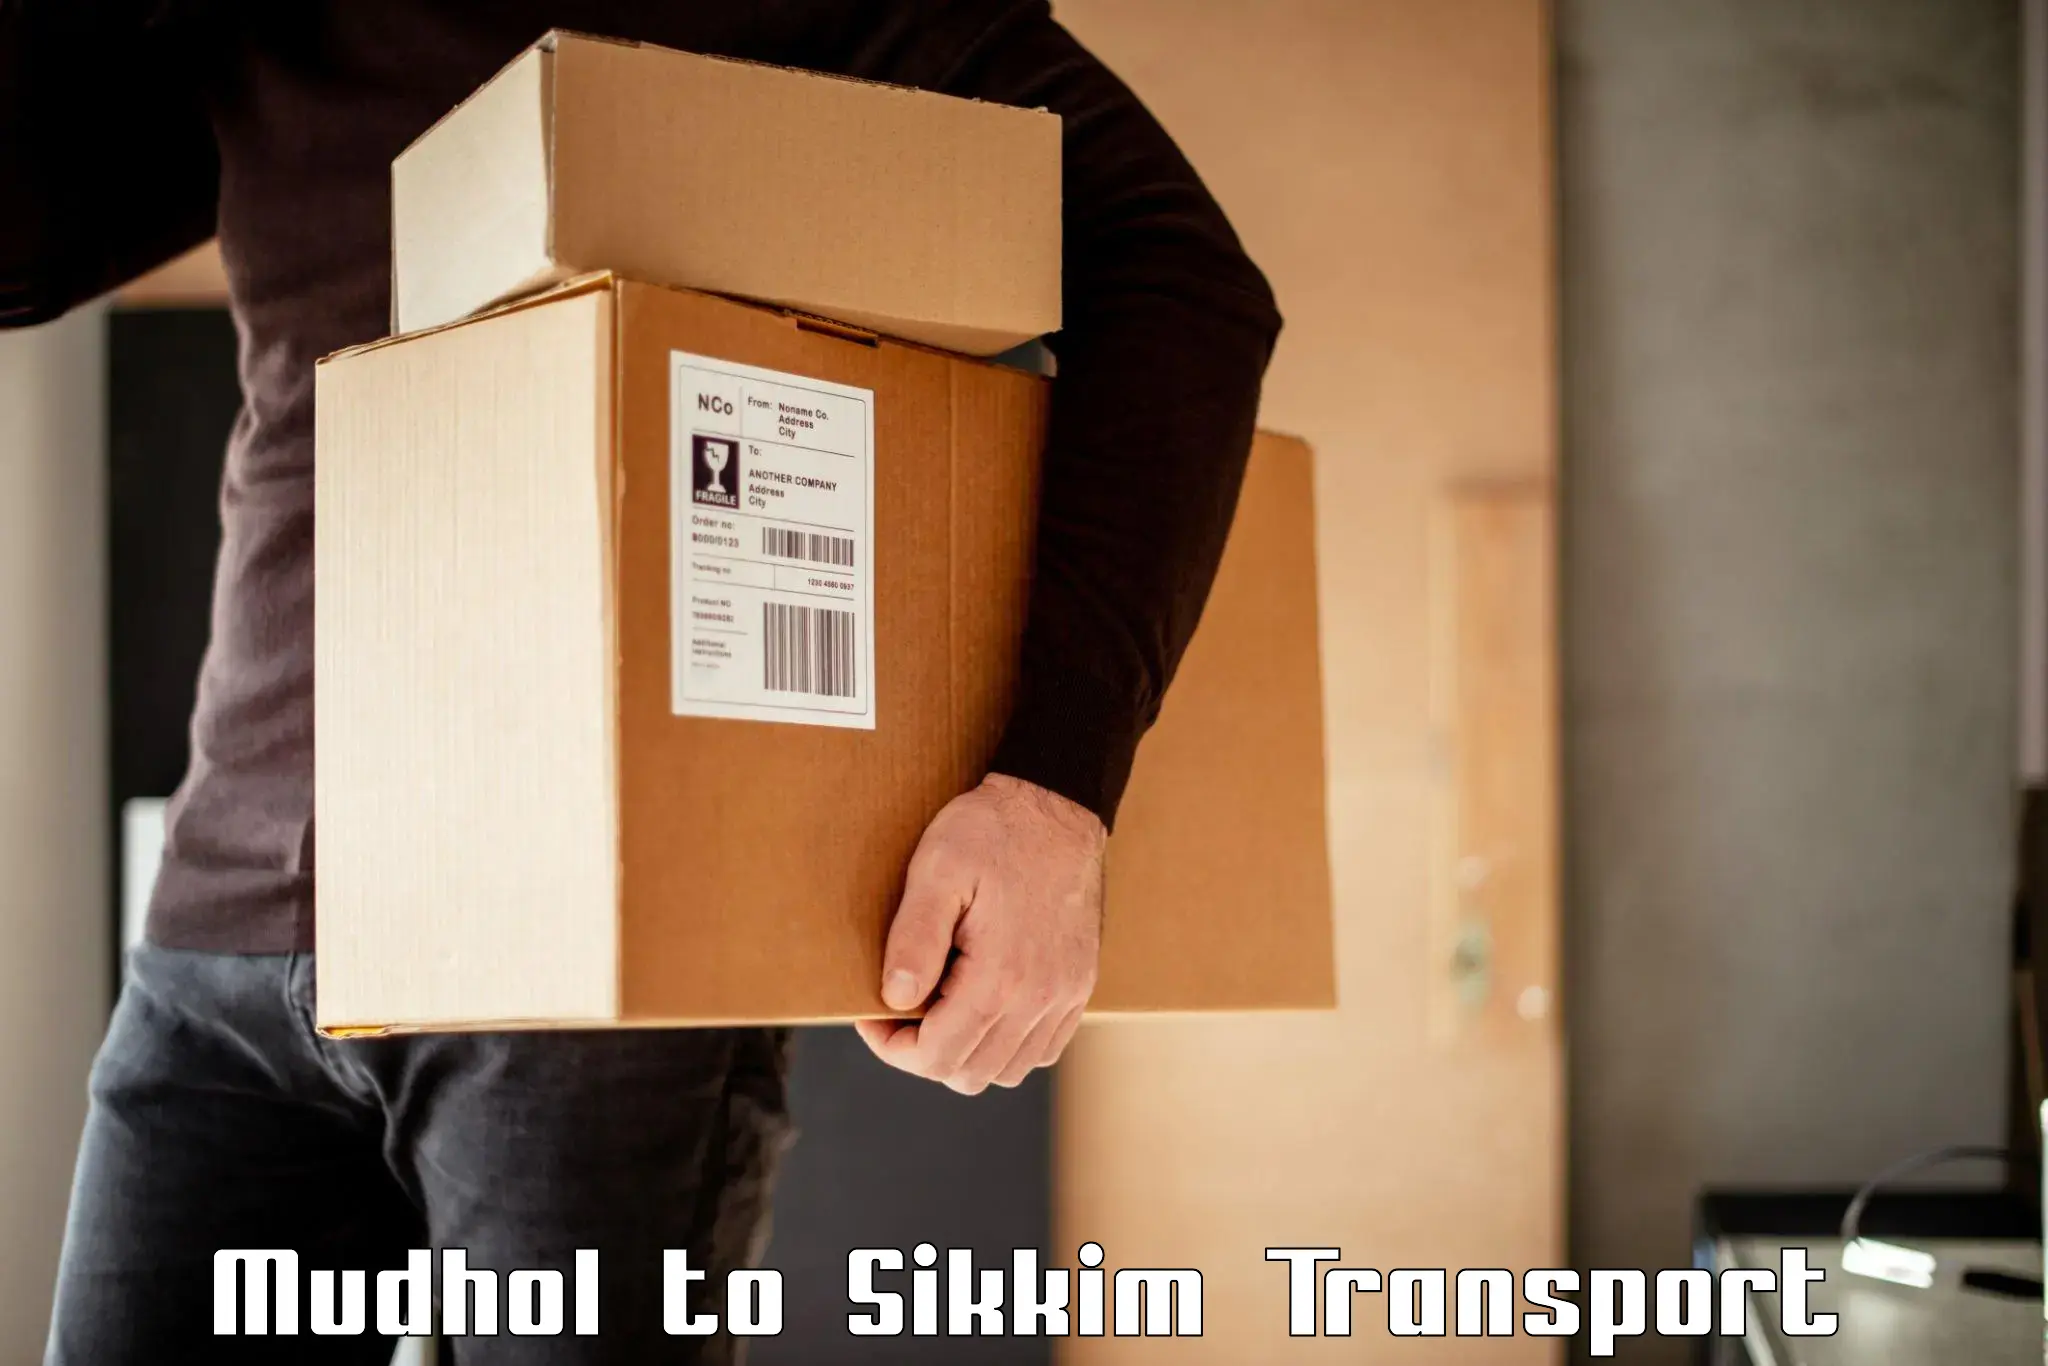 Shipping partner Mudhol to East Sikkim